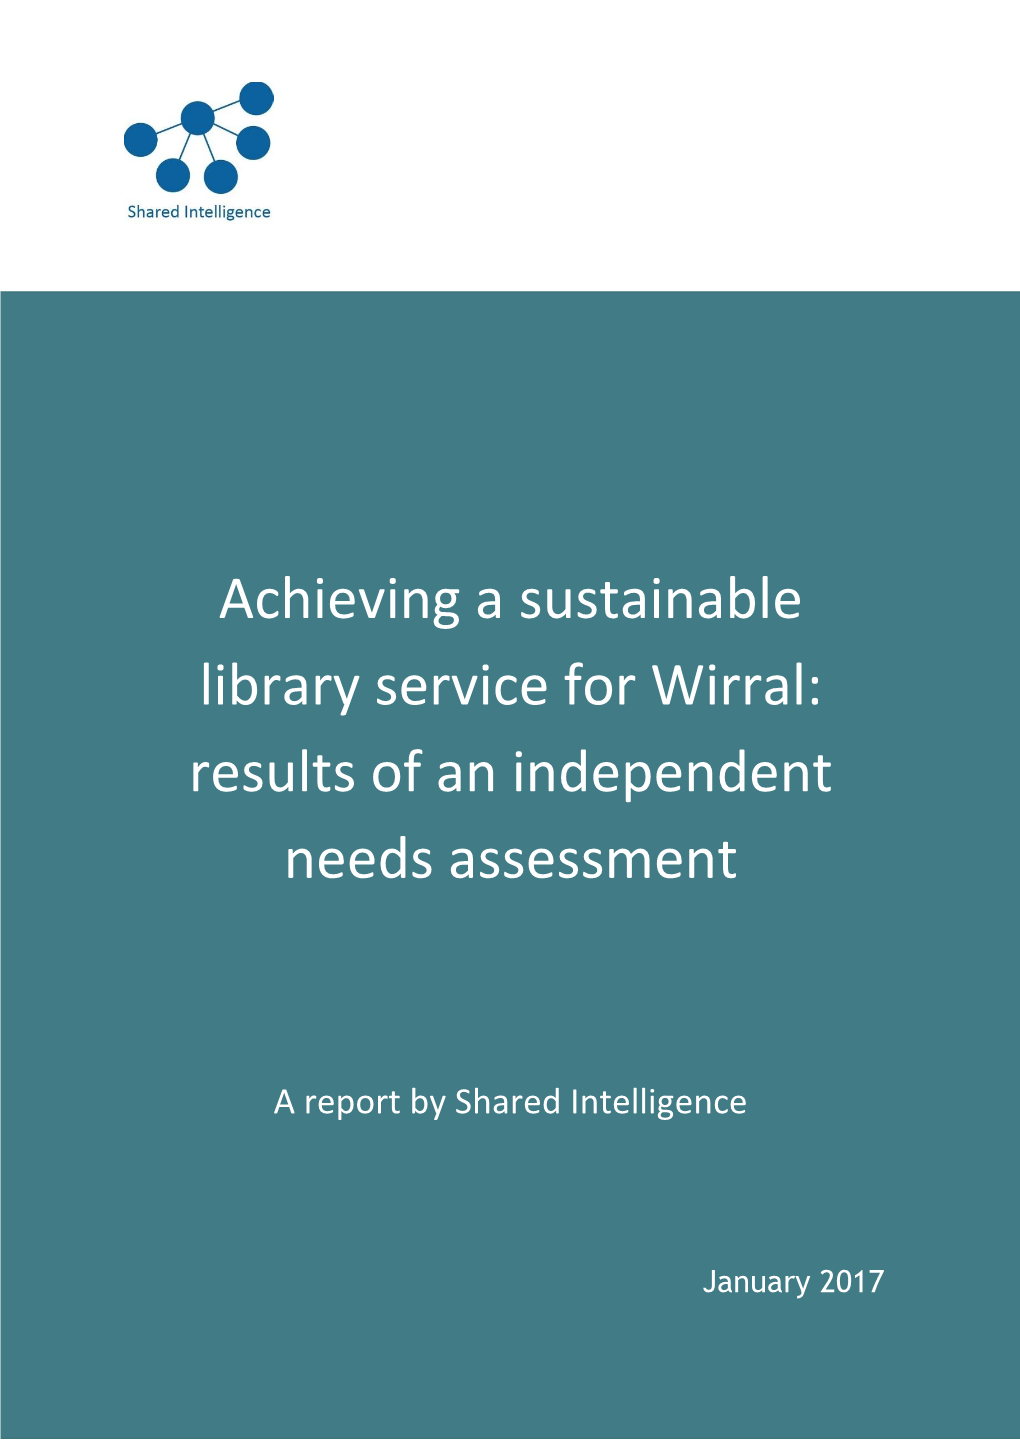 Achieving a Sustainable Library Service for Wirral: Results of an Independent Needs Assessment